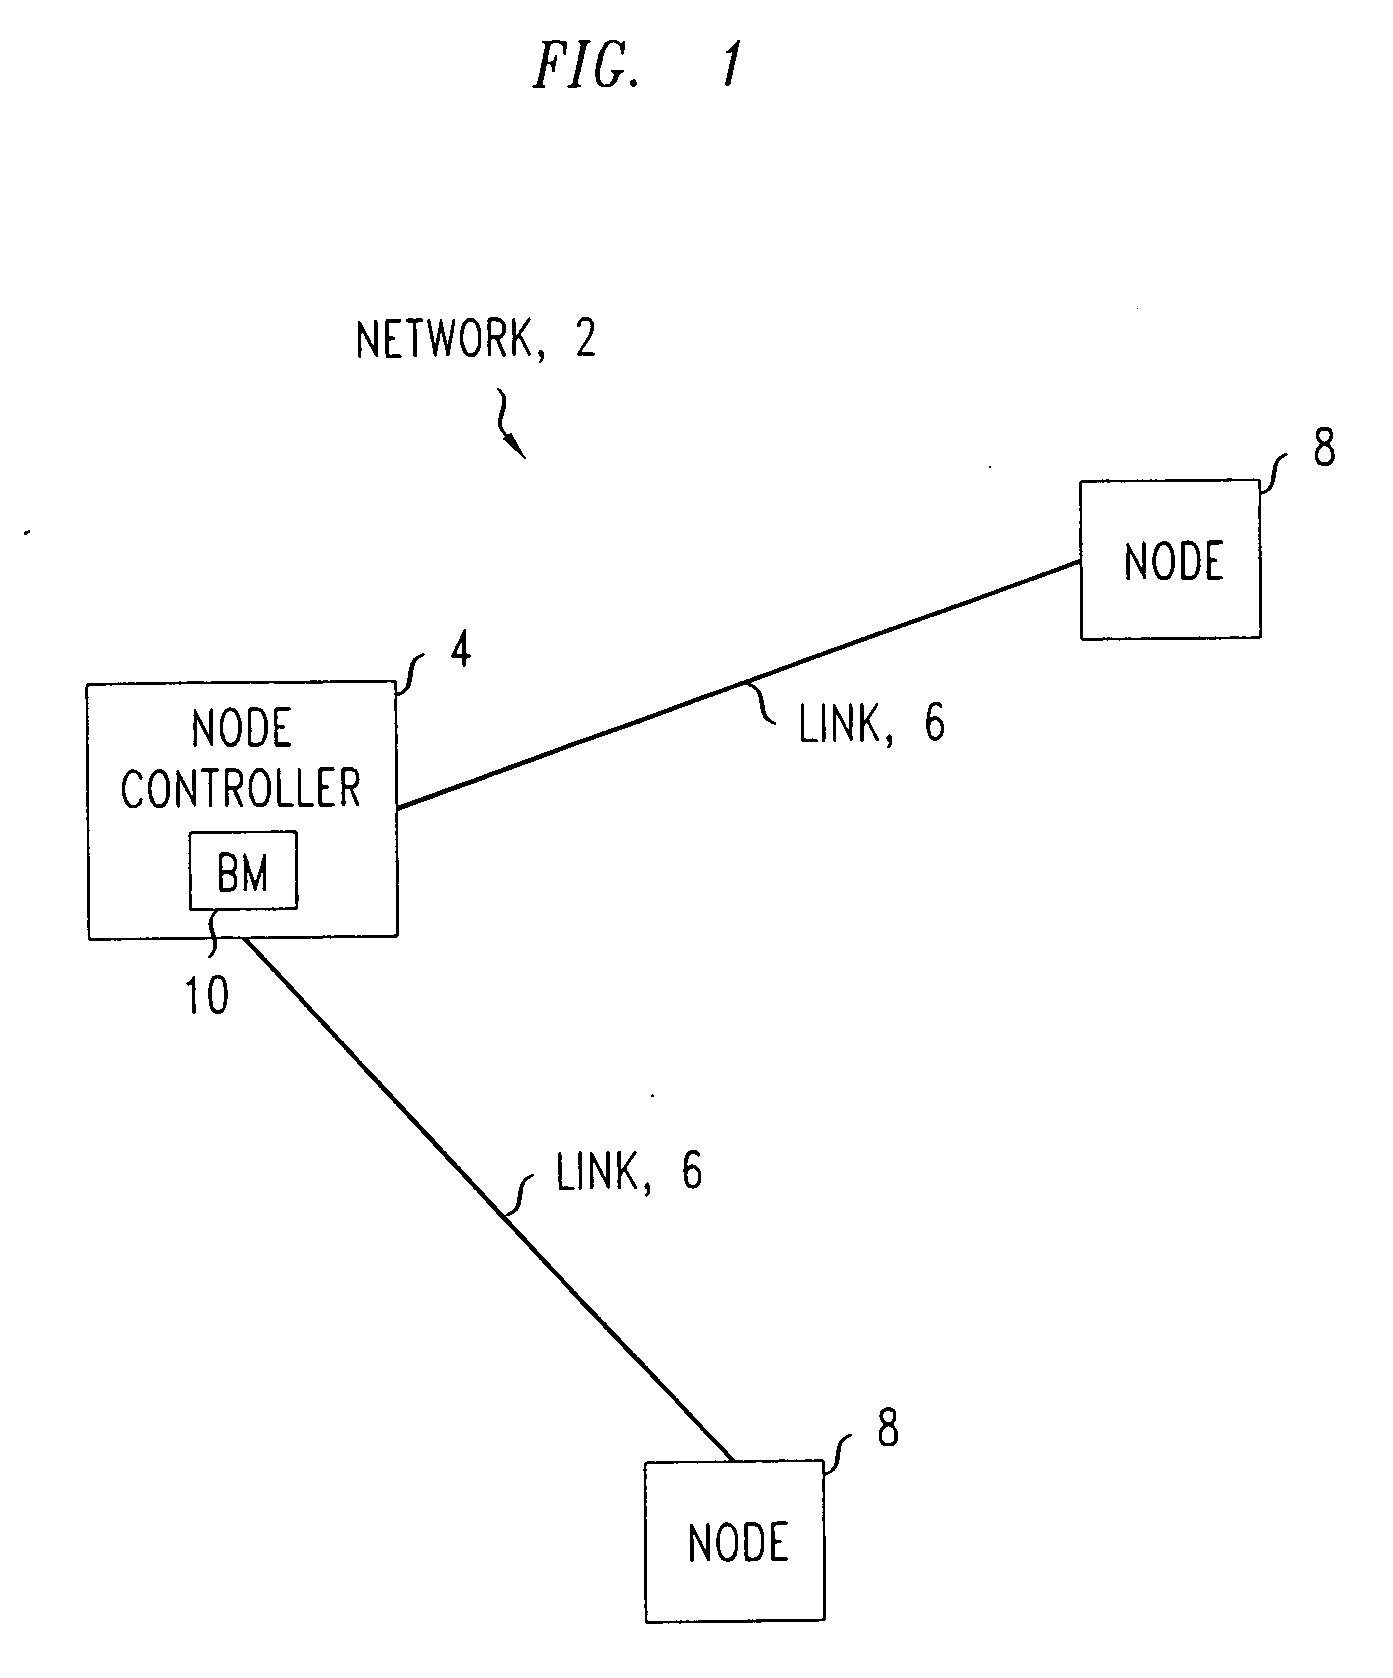 Traffic load control in a telecommunications network